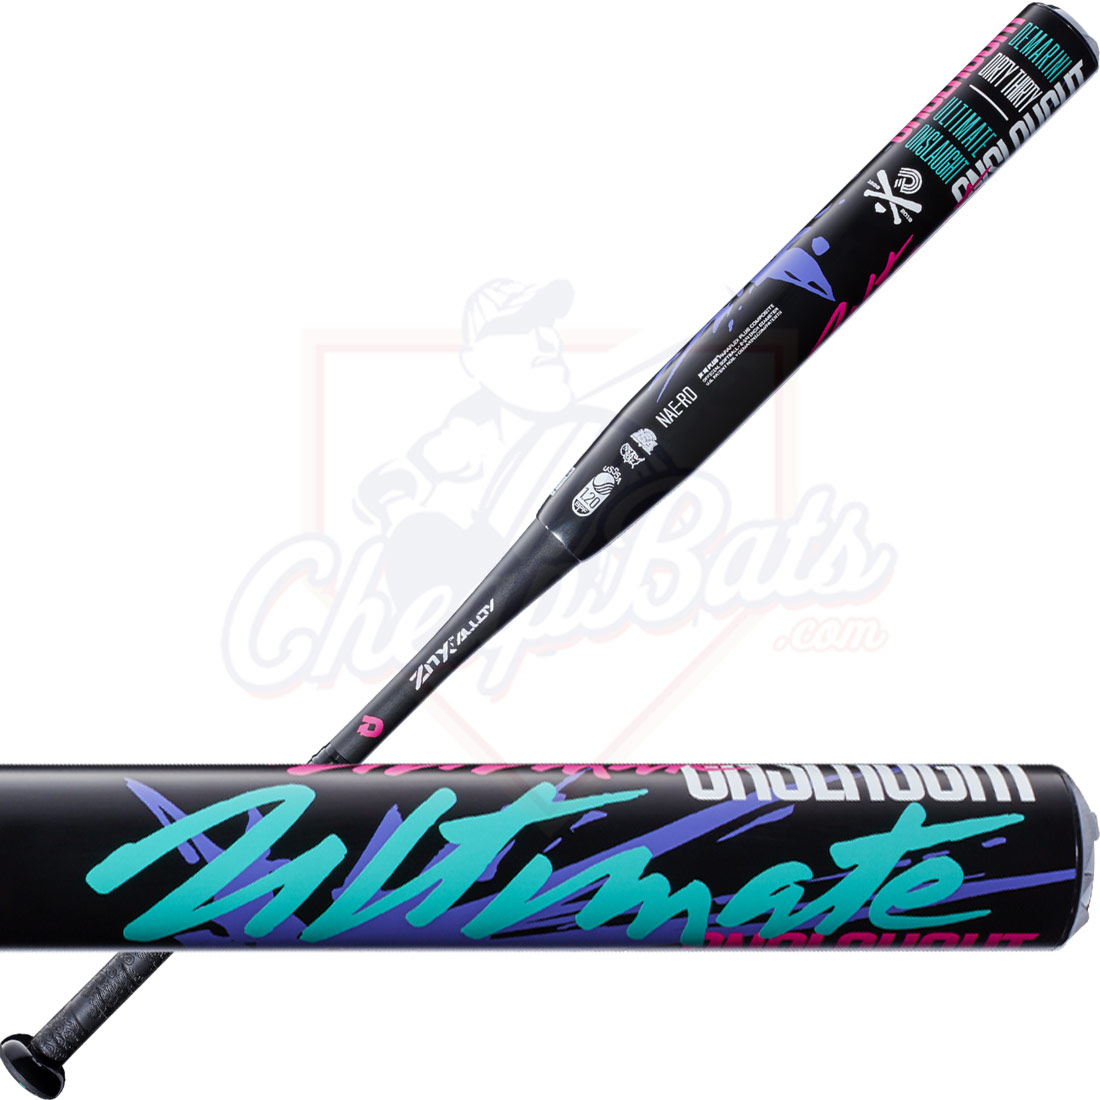 2020 DeMarini Ultimate Onslaught 30th Anniversary Slowpitch Softball Bat End Loaded USSSA WTDXNAE-RD